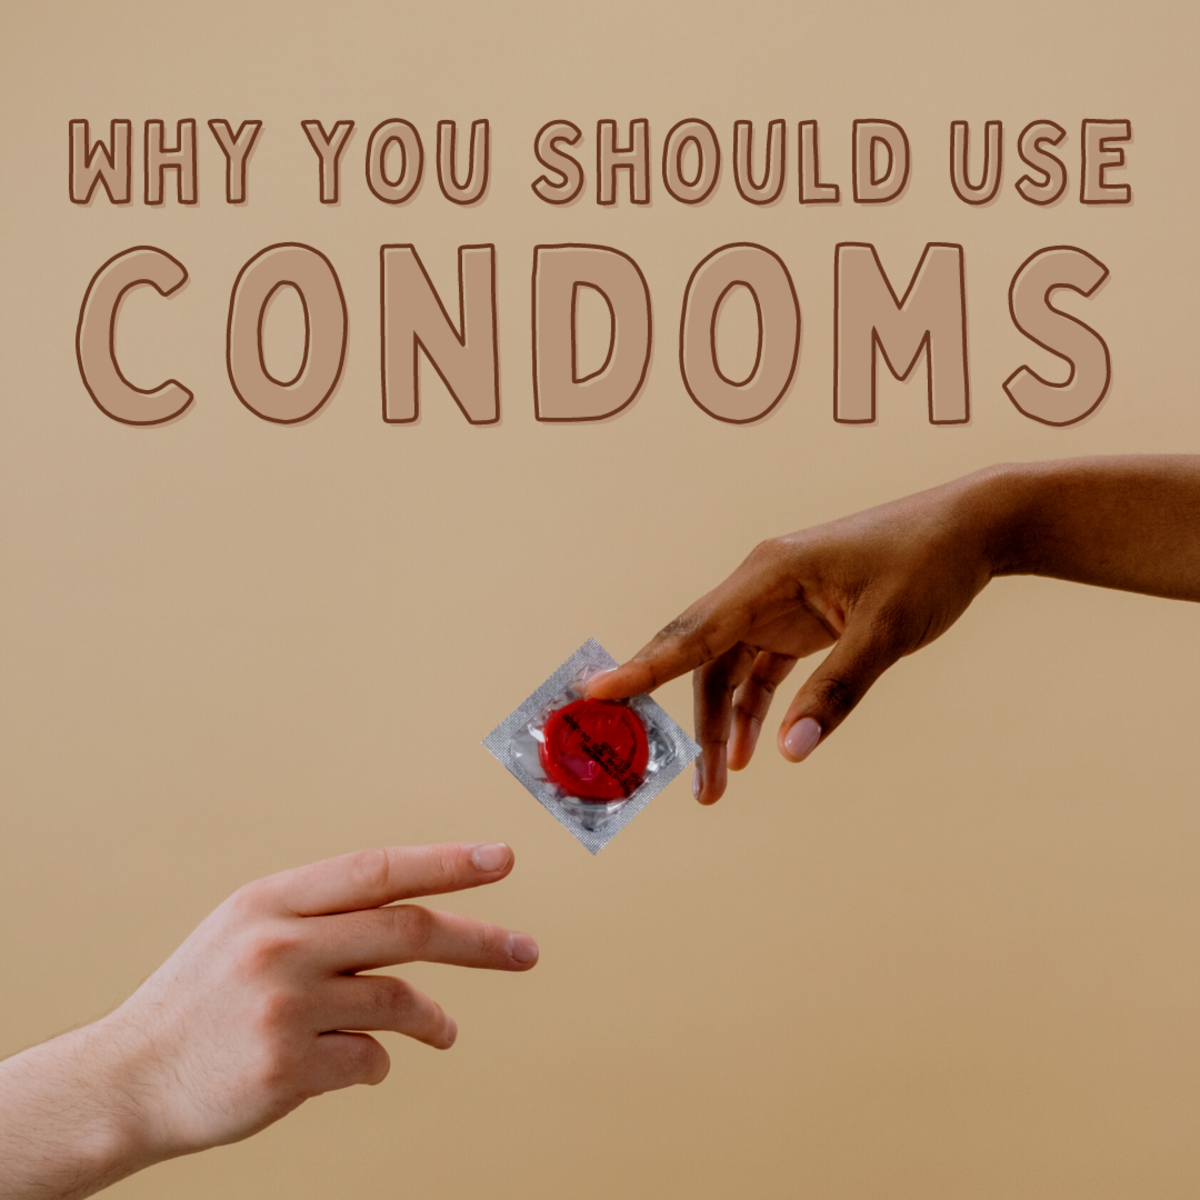 10 Reasons Why You Should Use Condoms